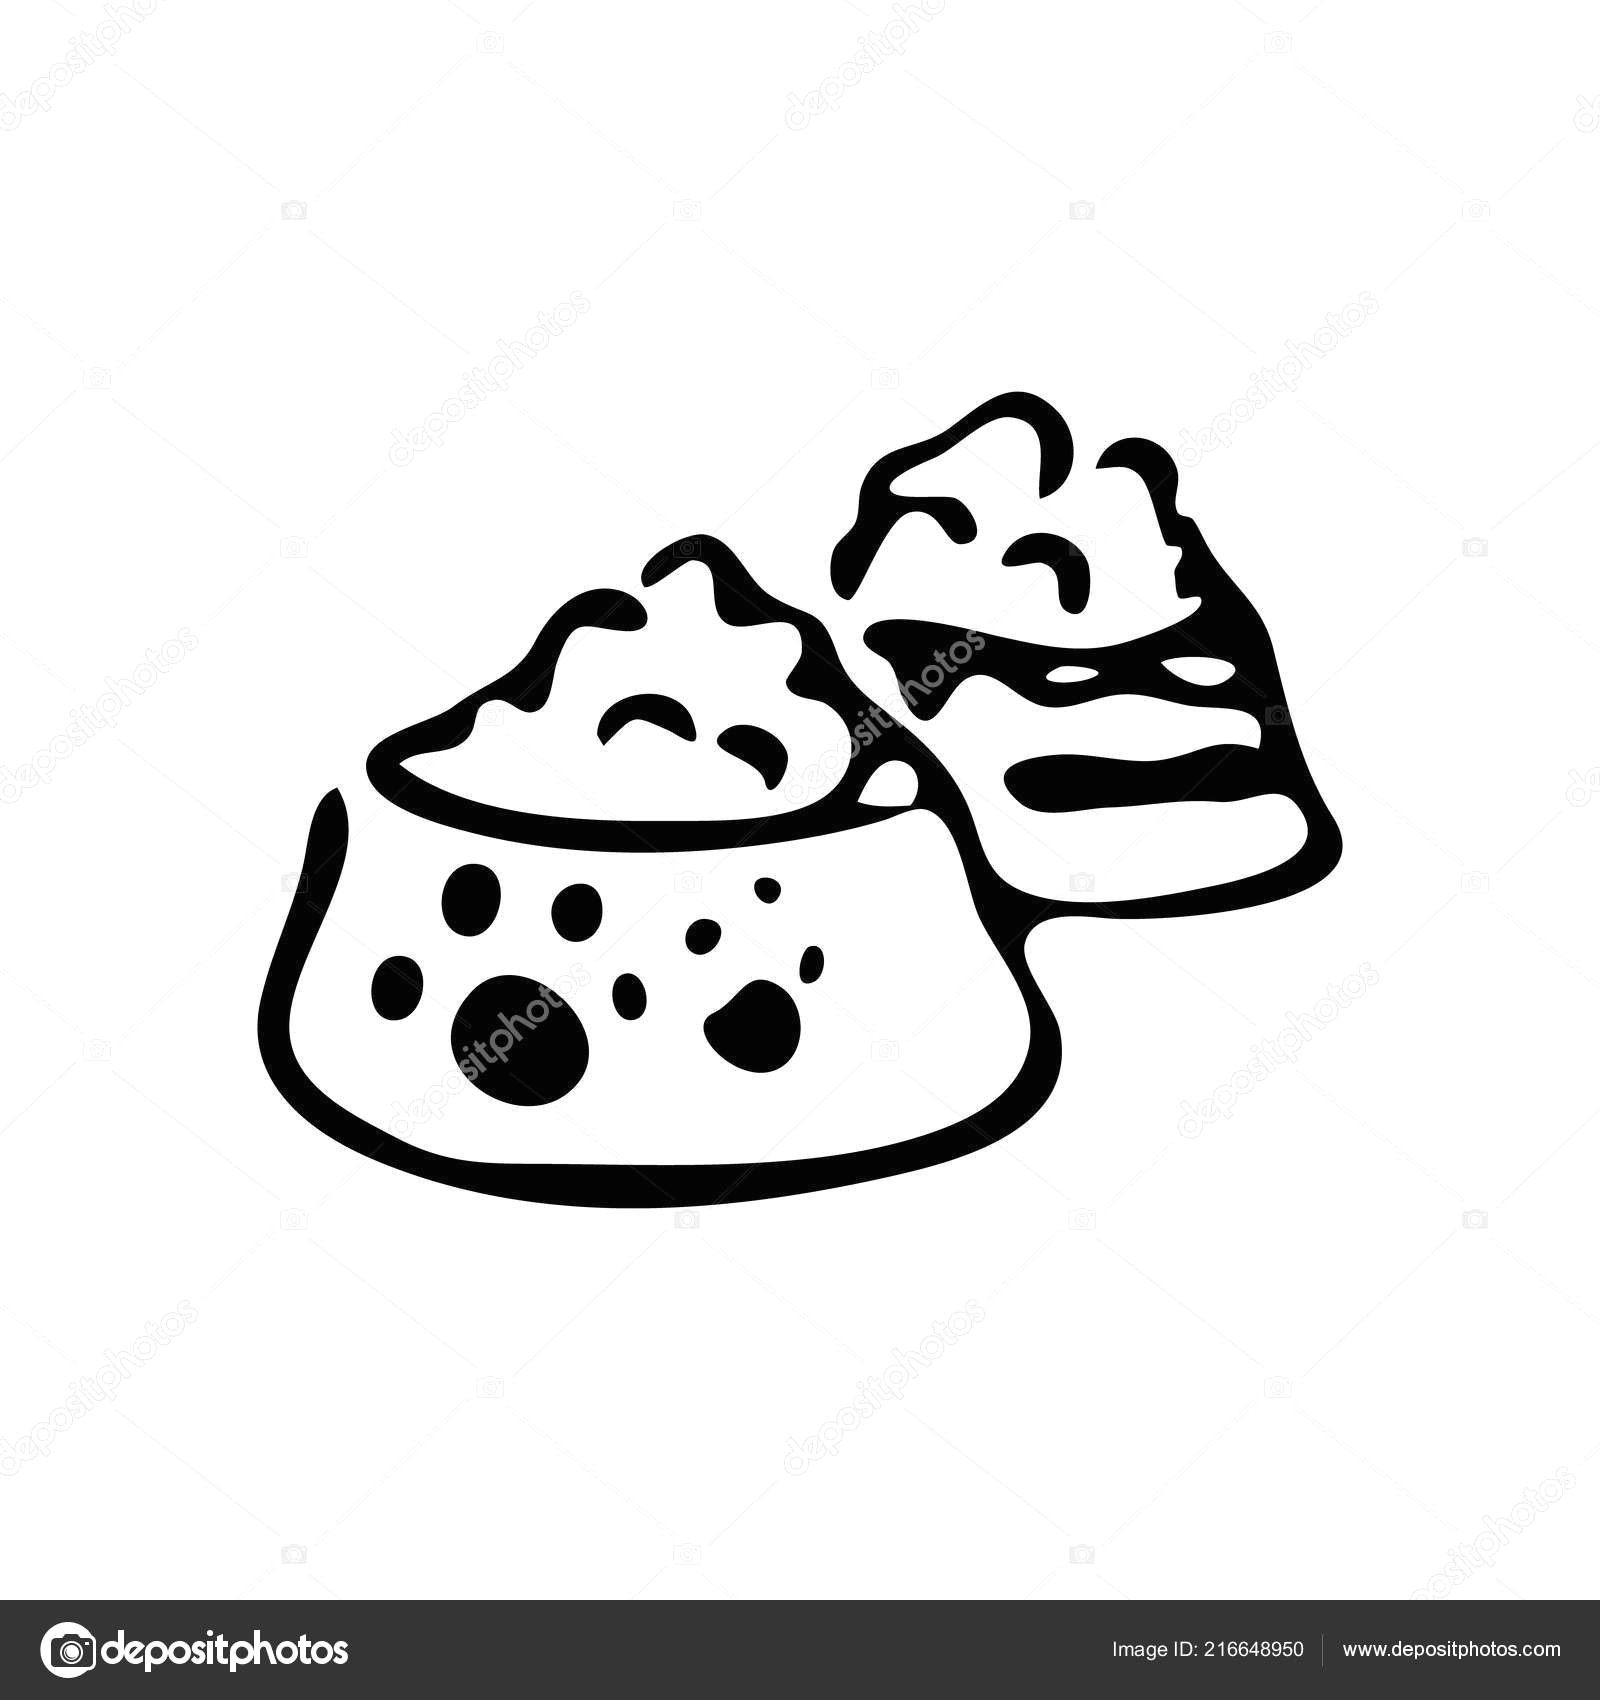 hand drawn dog bowls for feed doodle sketch pets icon decoration element isolated on white background vector illustration vektor od frozenbunn